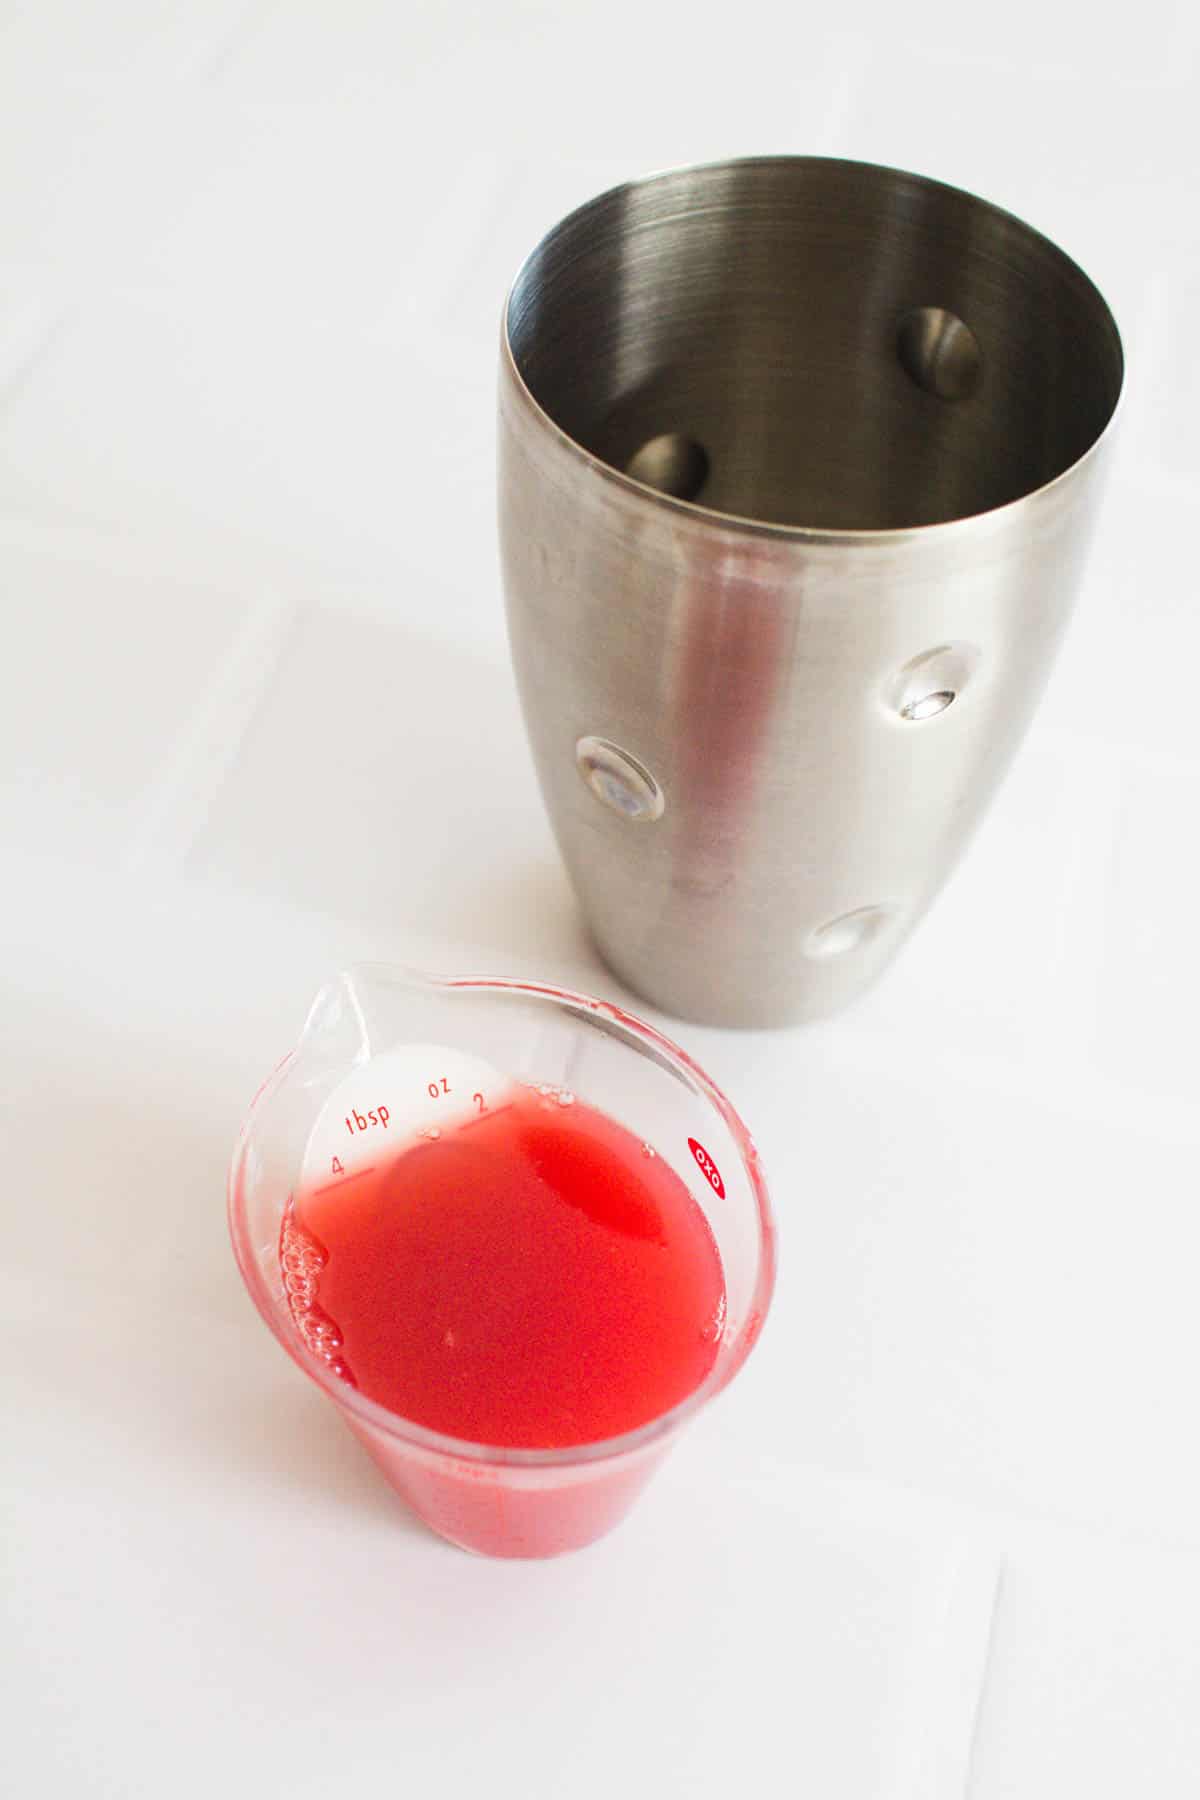 Blood orange juice in a measuring cup next to a cocktail shaker.